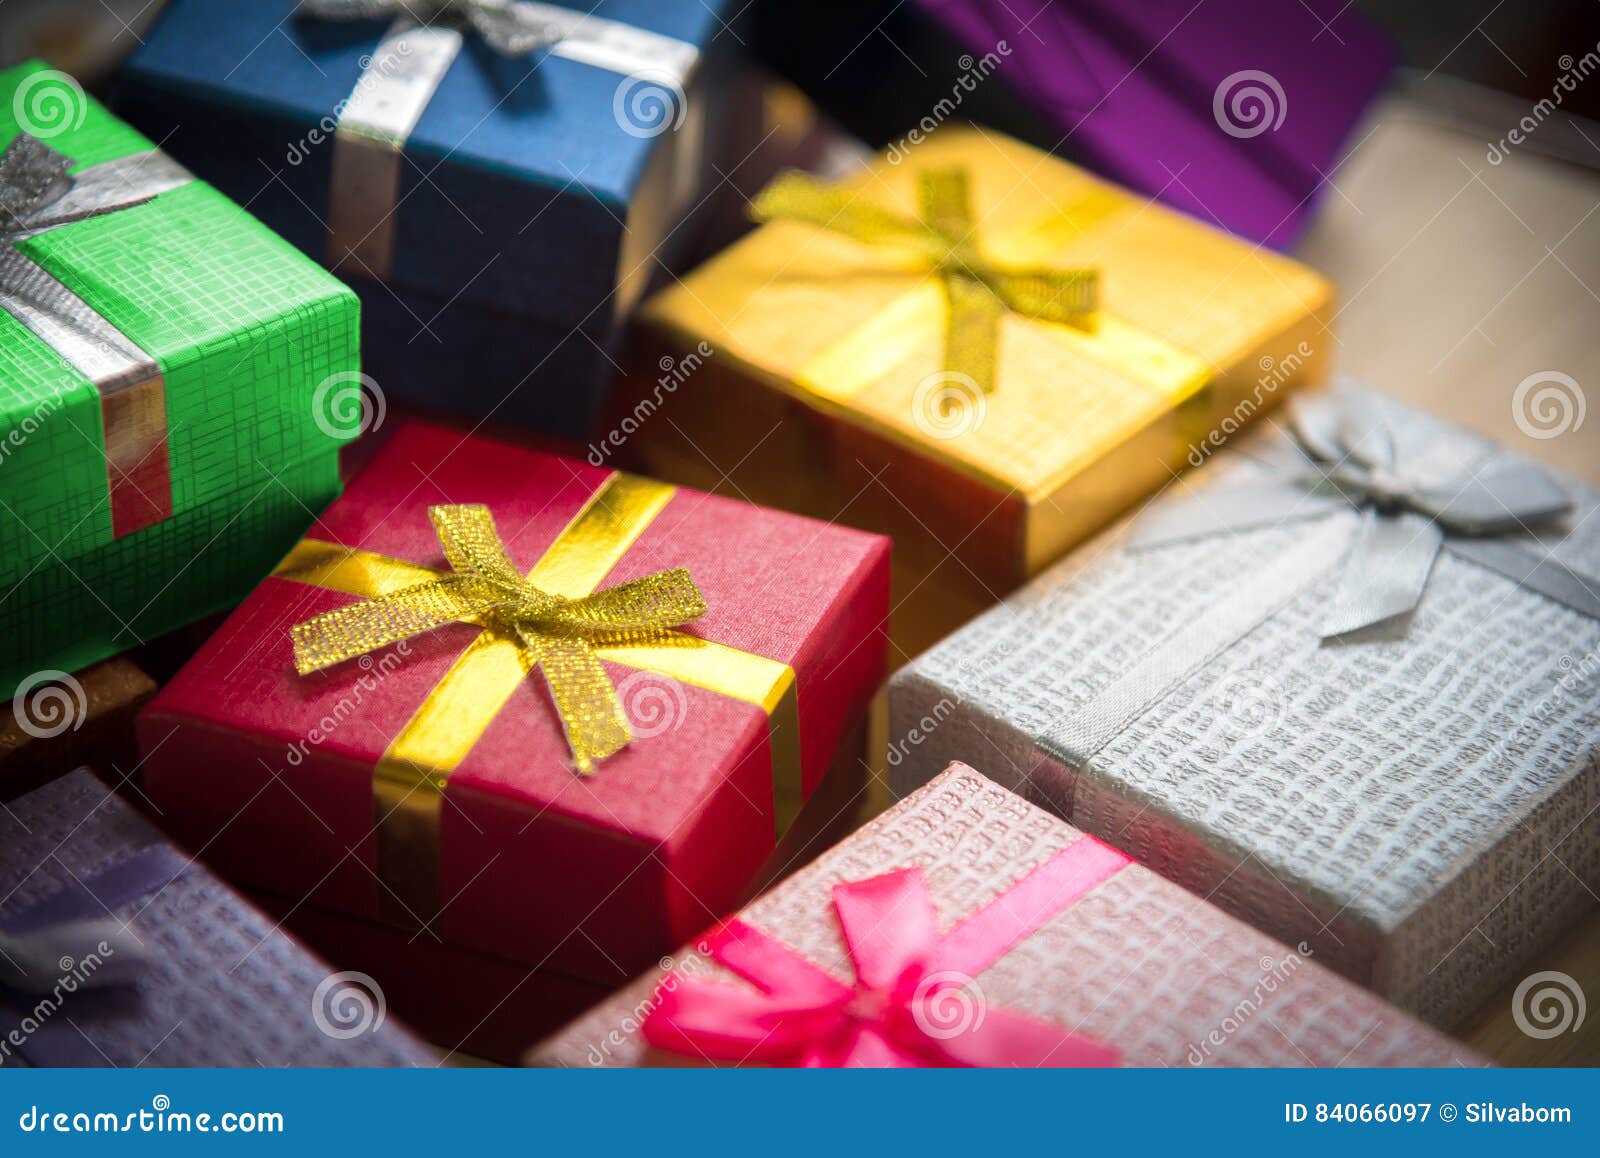 various color of christmas&happy new year gift boxes stack, reward holiday presents greeting celebration card concept